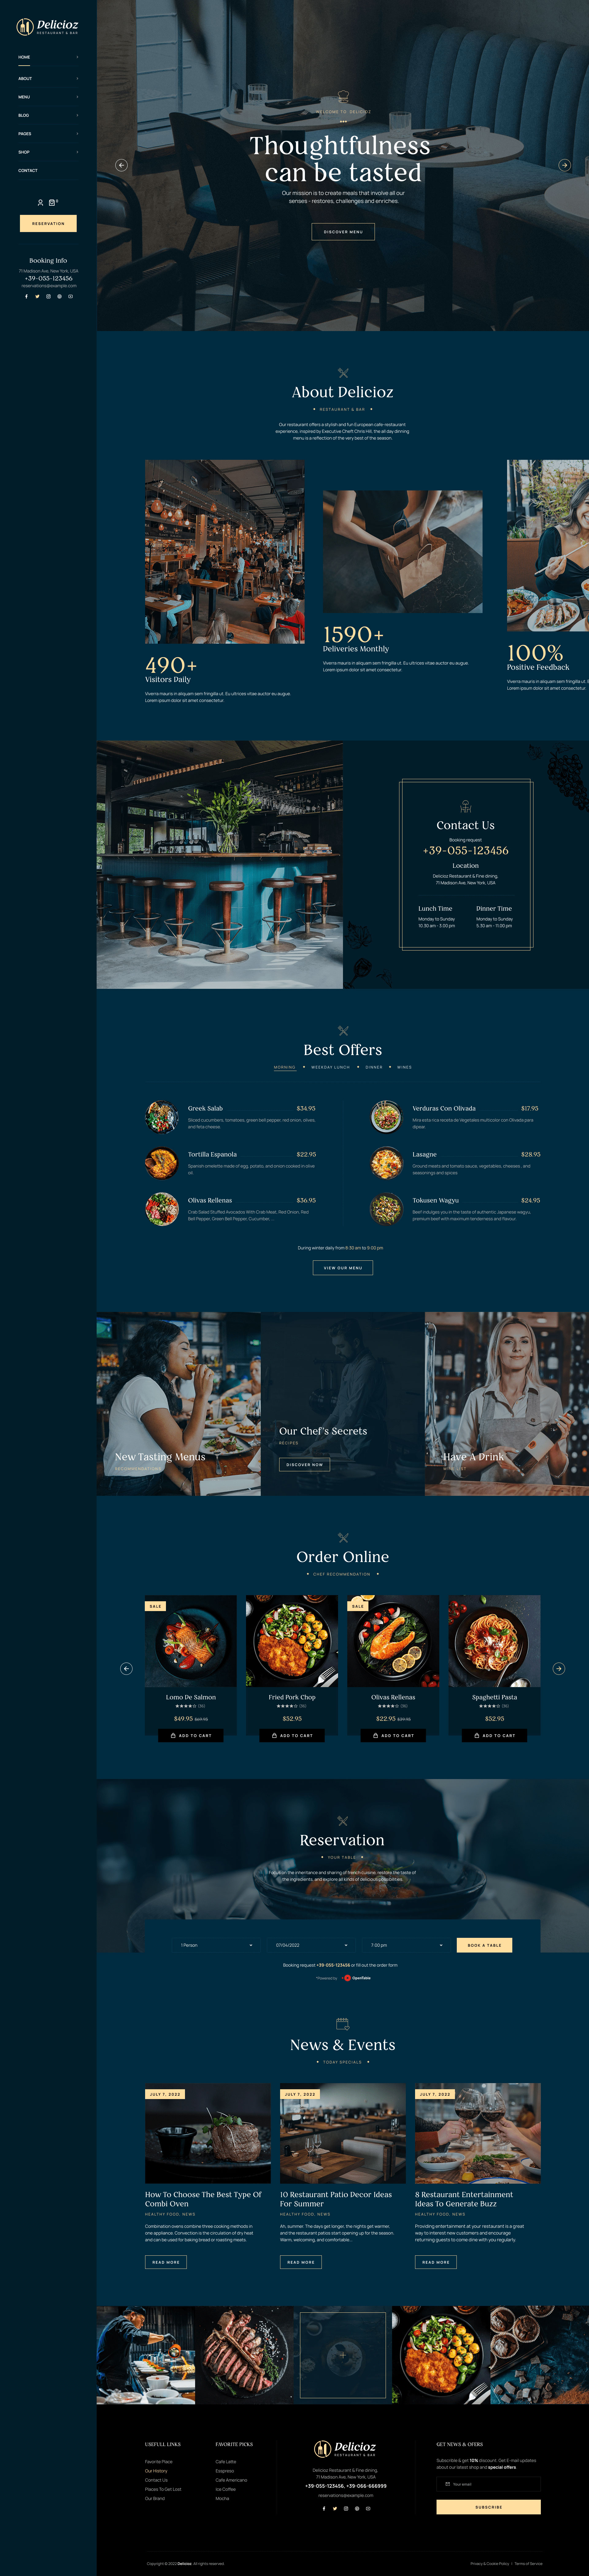 Page image of a wonderful WordPress template, on a restaurant theme.